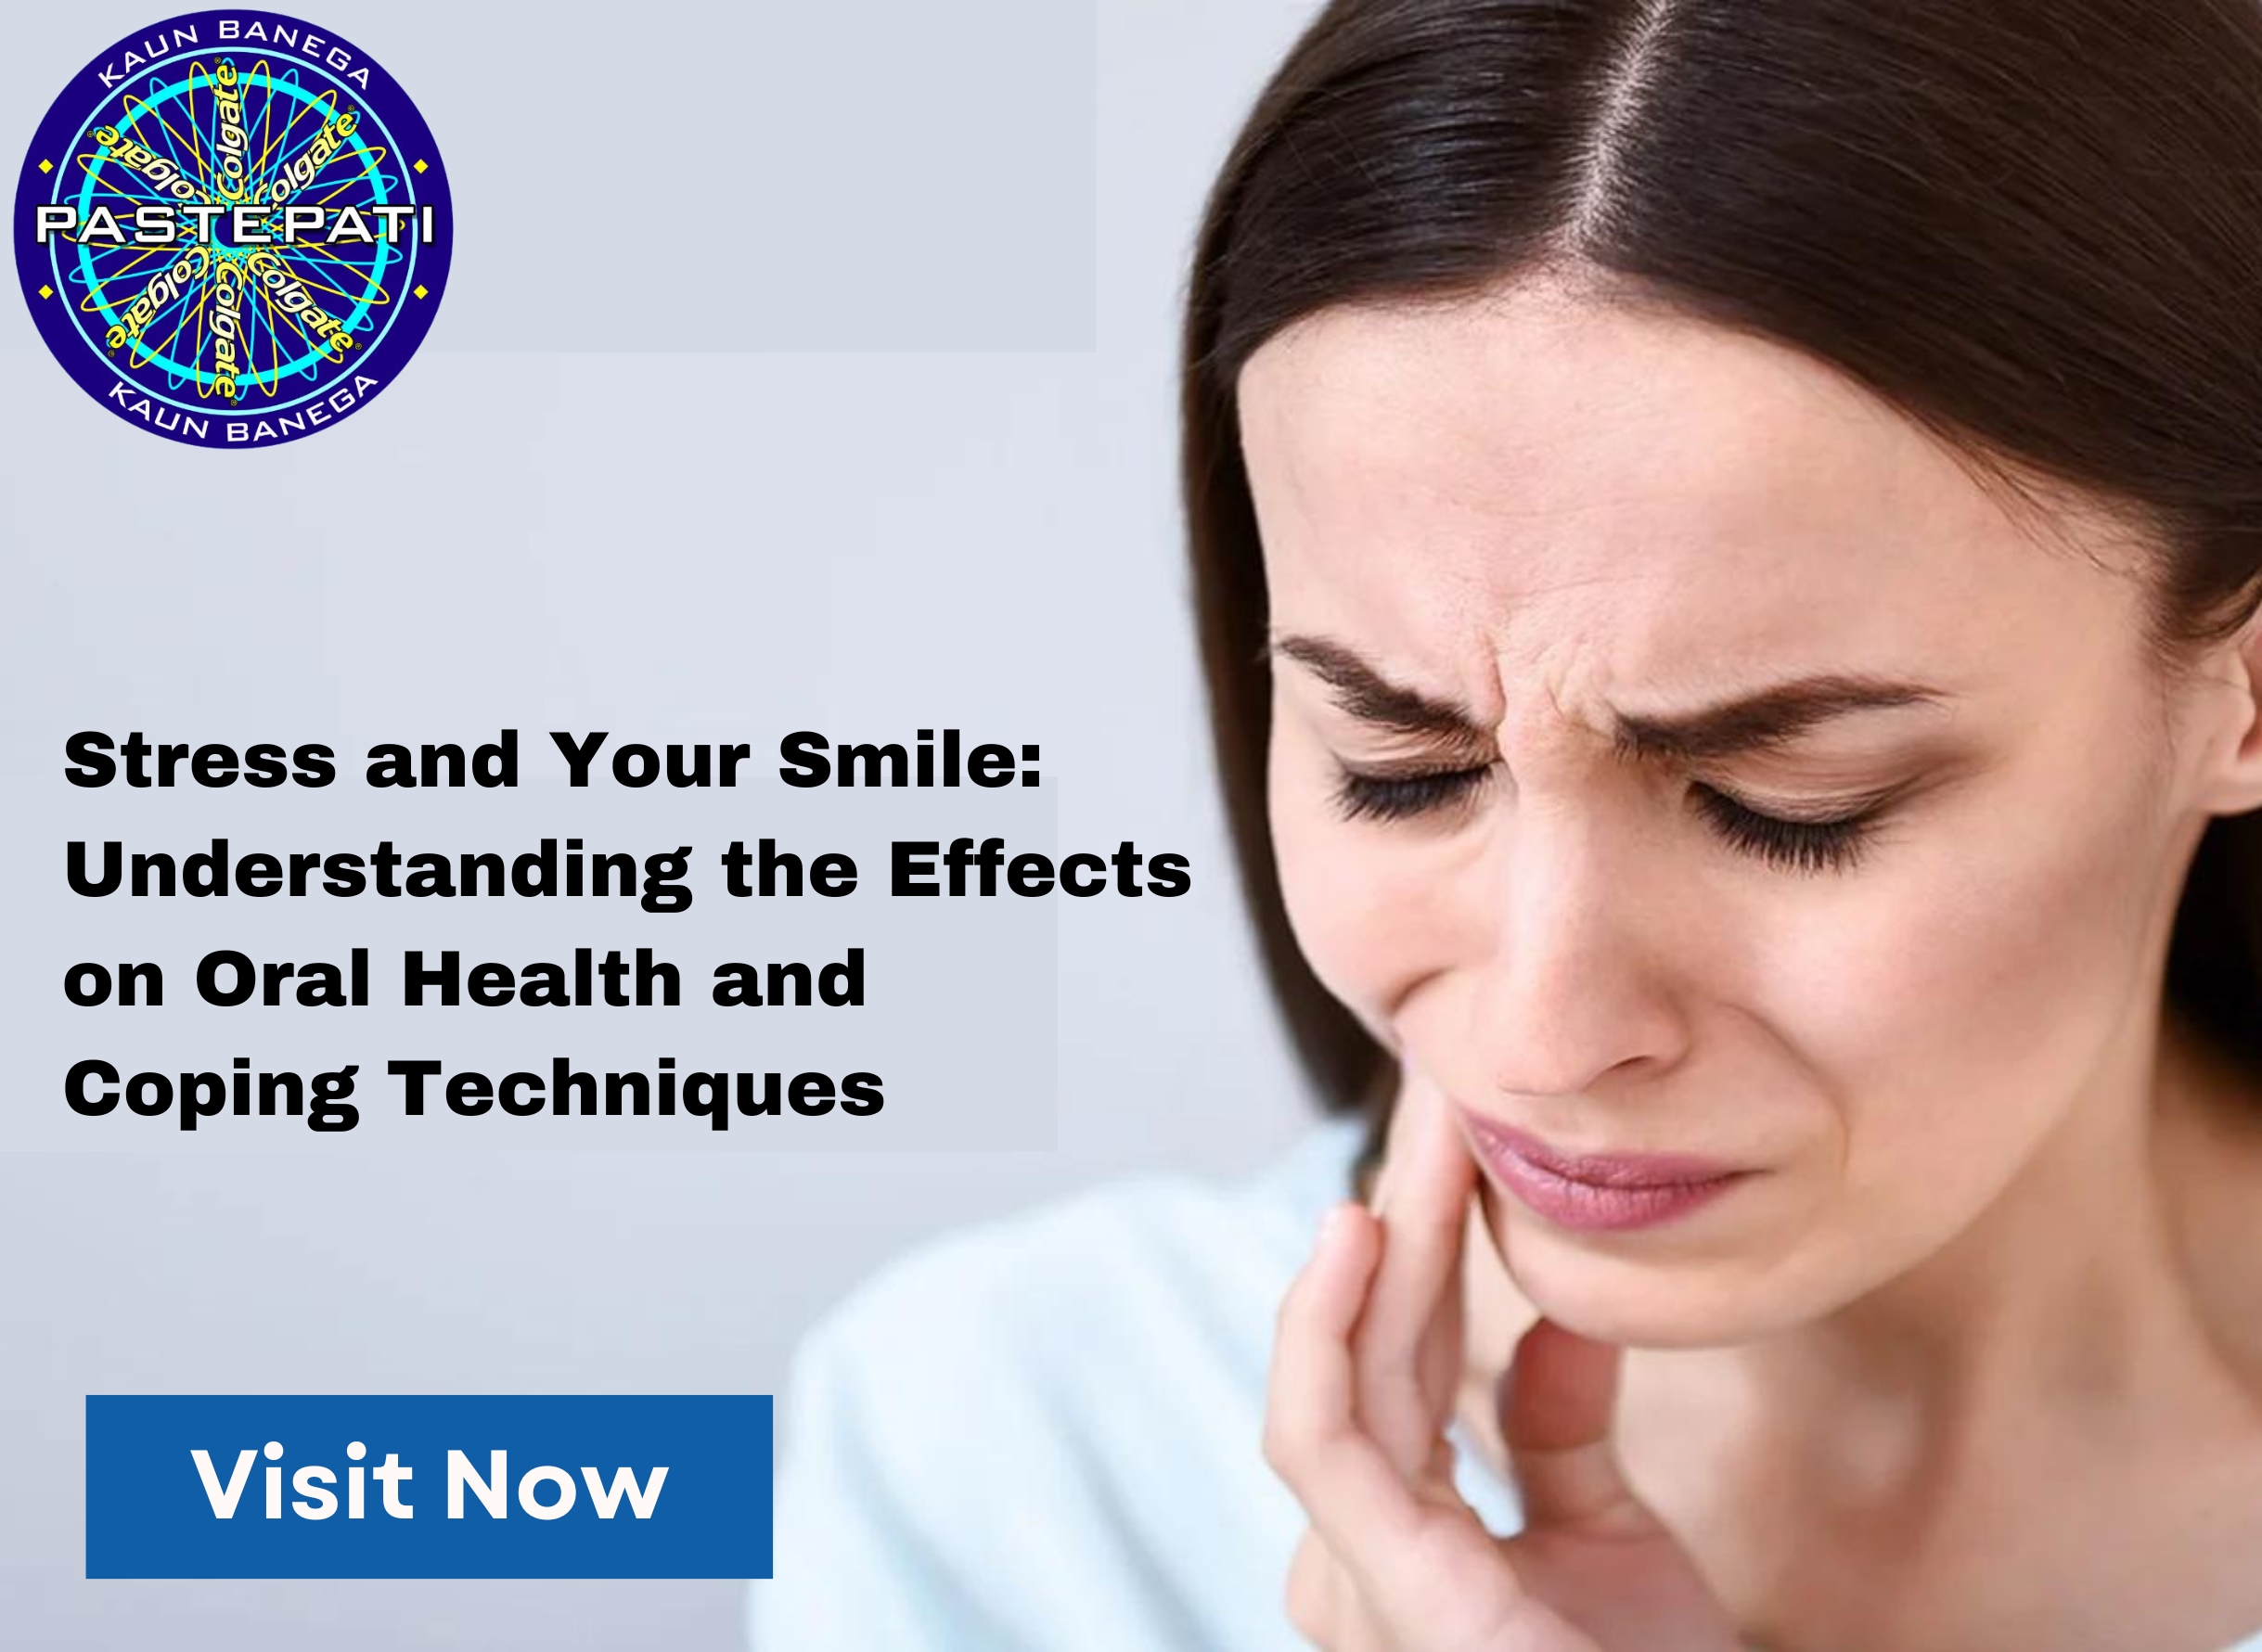 Stress and Your Smile: Understanding the Effects on Oral Health and Coping Techniques